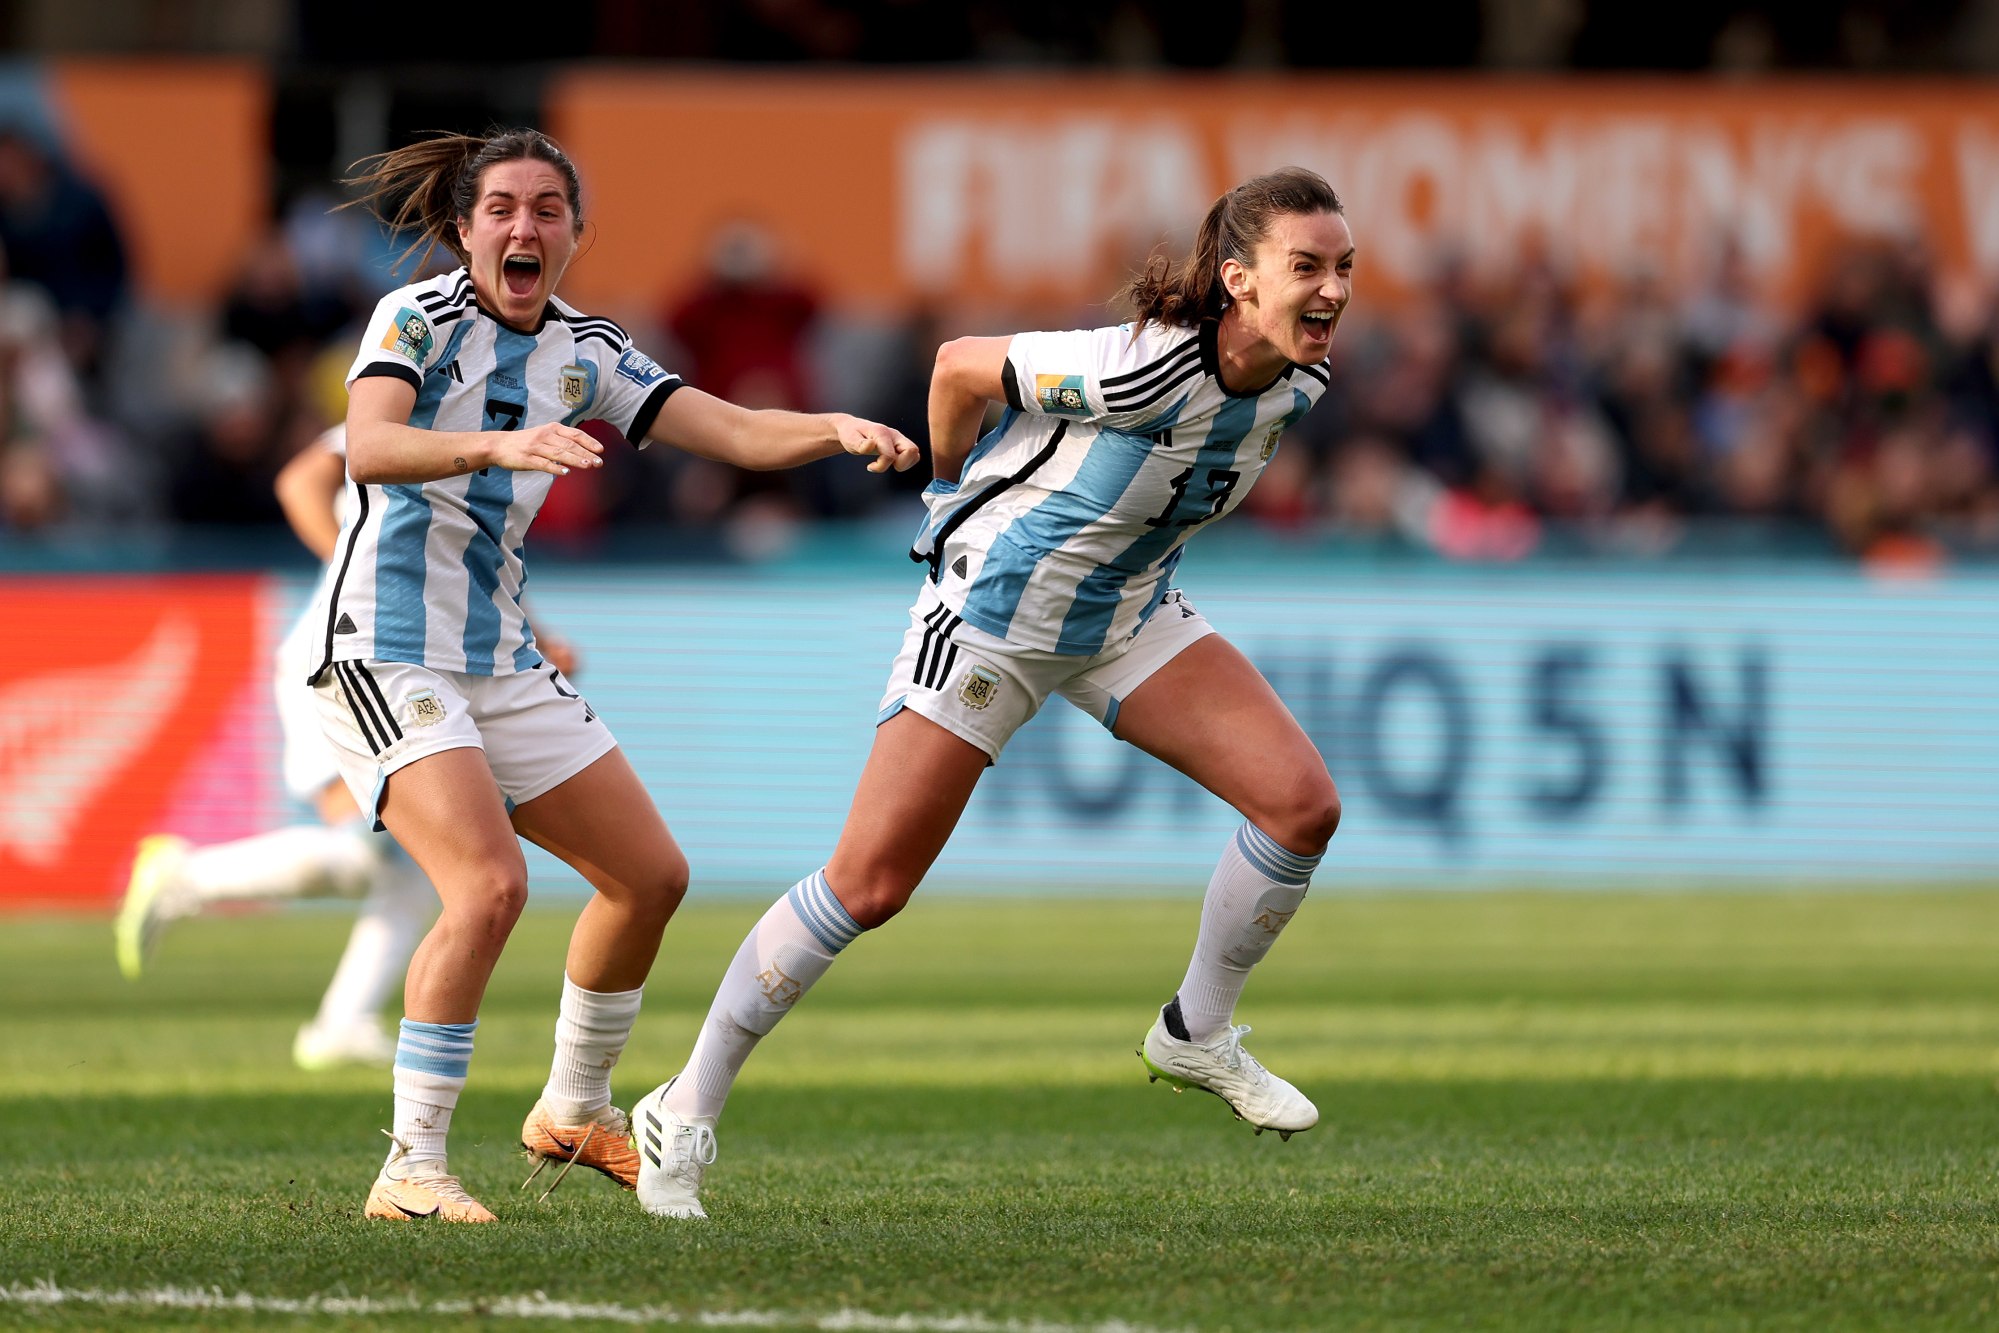 Argentina battle back to earn draw against South Africa at Women's World Cup